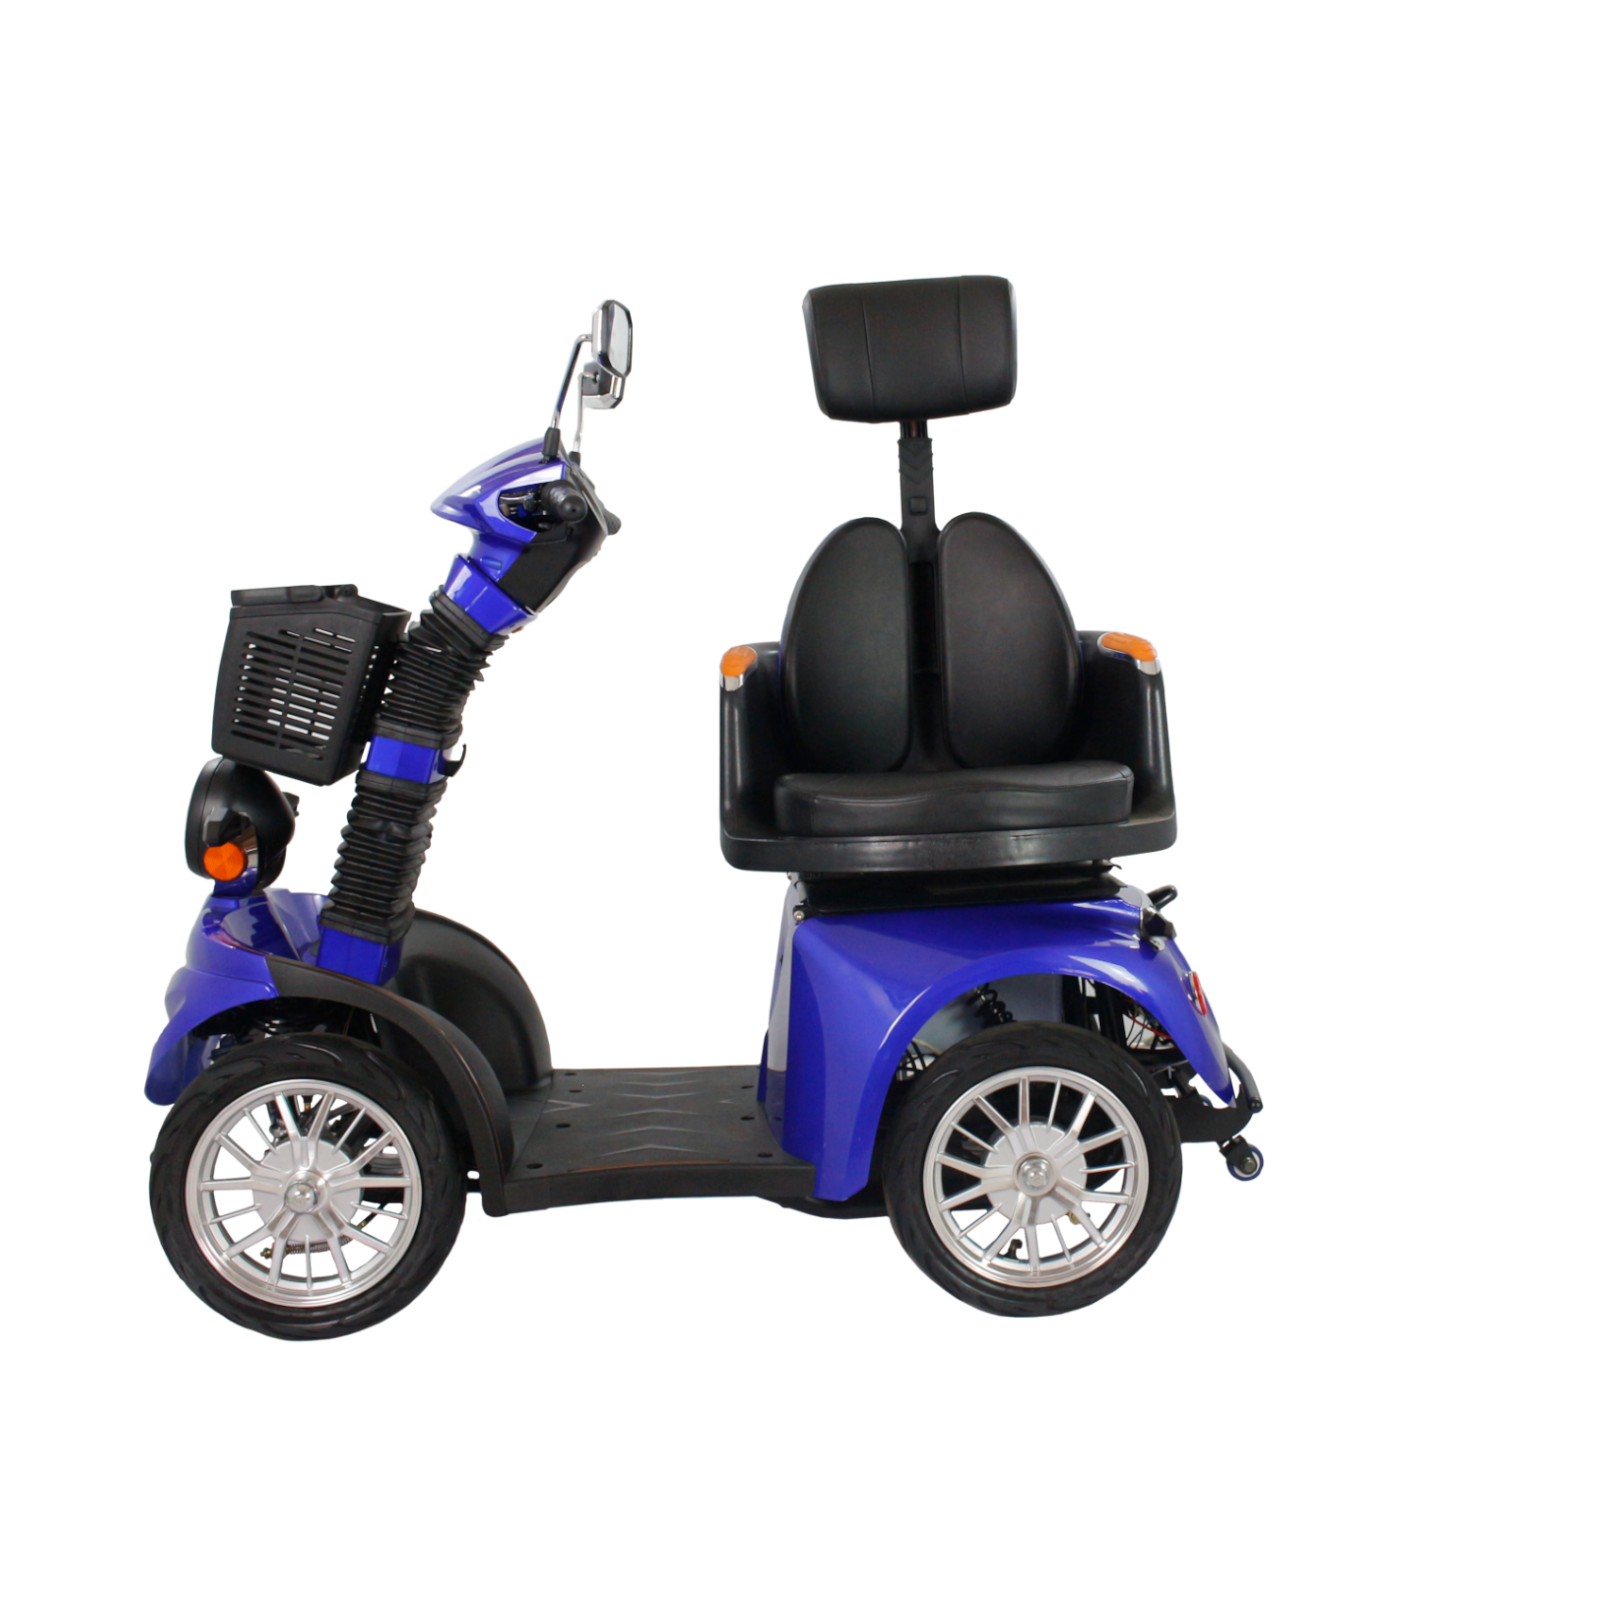 GIO Titan Premium Heavy Duty Mobility Scooter for Outdoors With